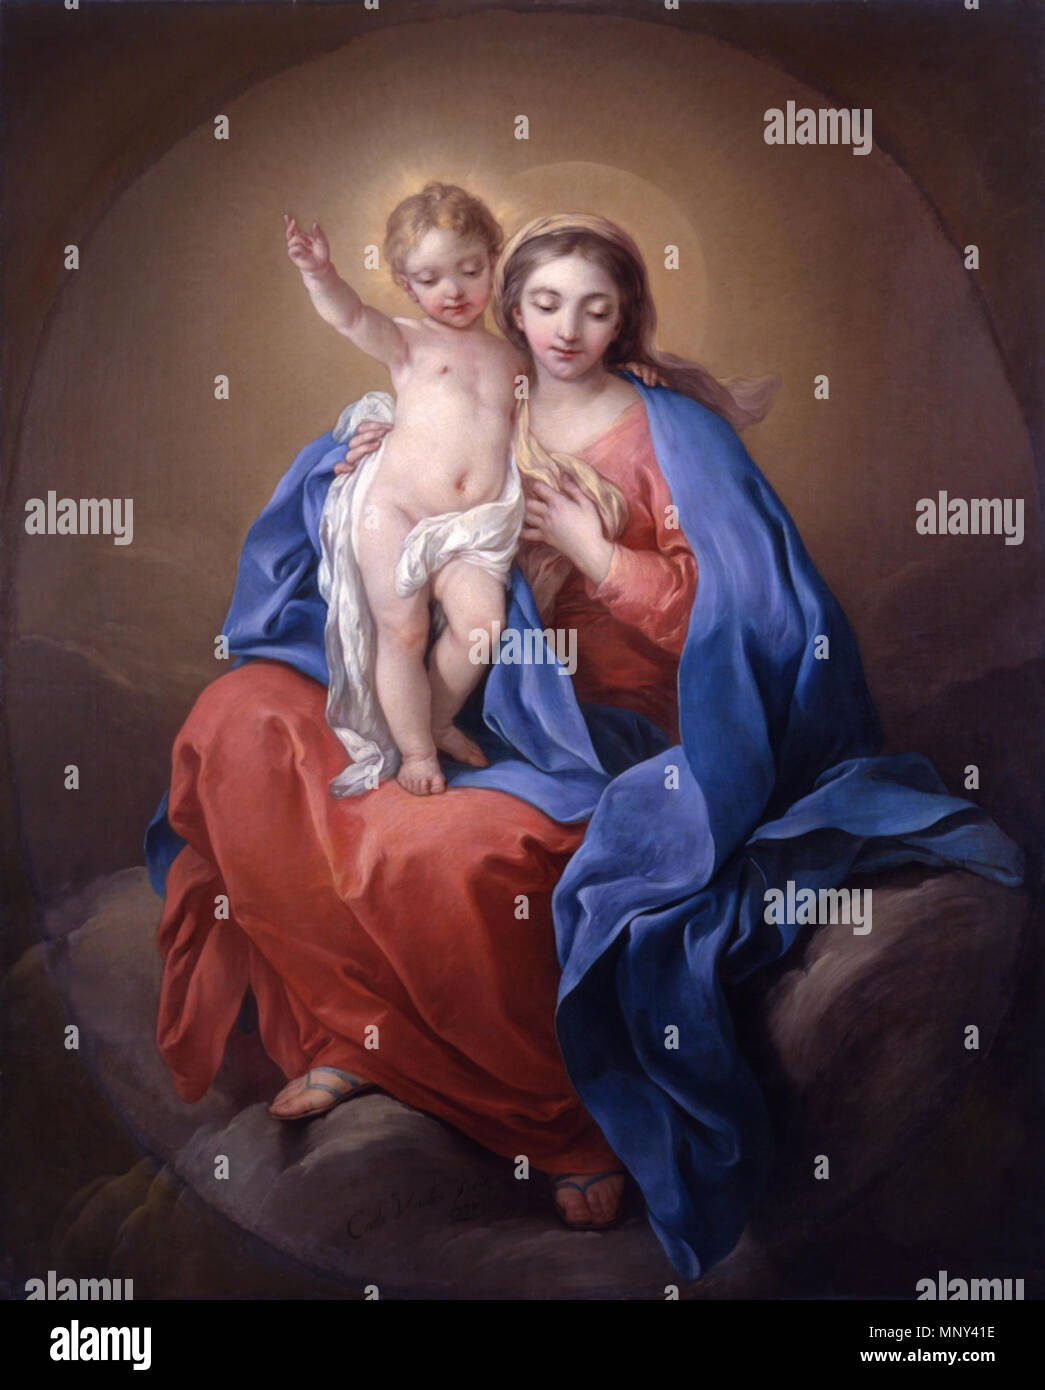 . Virgin and Child . 1738.    Charles-André van Loo  (1705–1765)     Alternative names Carle van Loo  Description French painter  Date of birth/death 15 February 1705 15 July 1765  Location of birth/death Nice Paris  Work location Rome, Turin, Paris  Authority control  : Q686597 VIAF: 89002333 ISNI: 0000 0001 2142 9250 ULAN: 500017868 LCCN: n82108684 WGA: LOO, Carle van WorldCat 1224 Van-Loo-Carle-Vierge-Enfant-Rouen Stock Photo